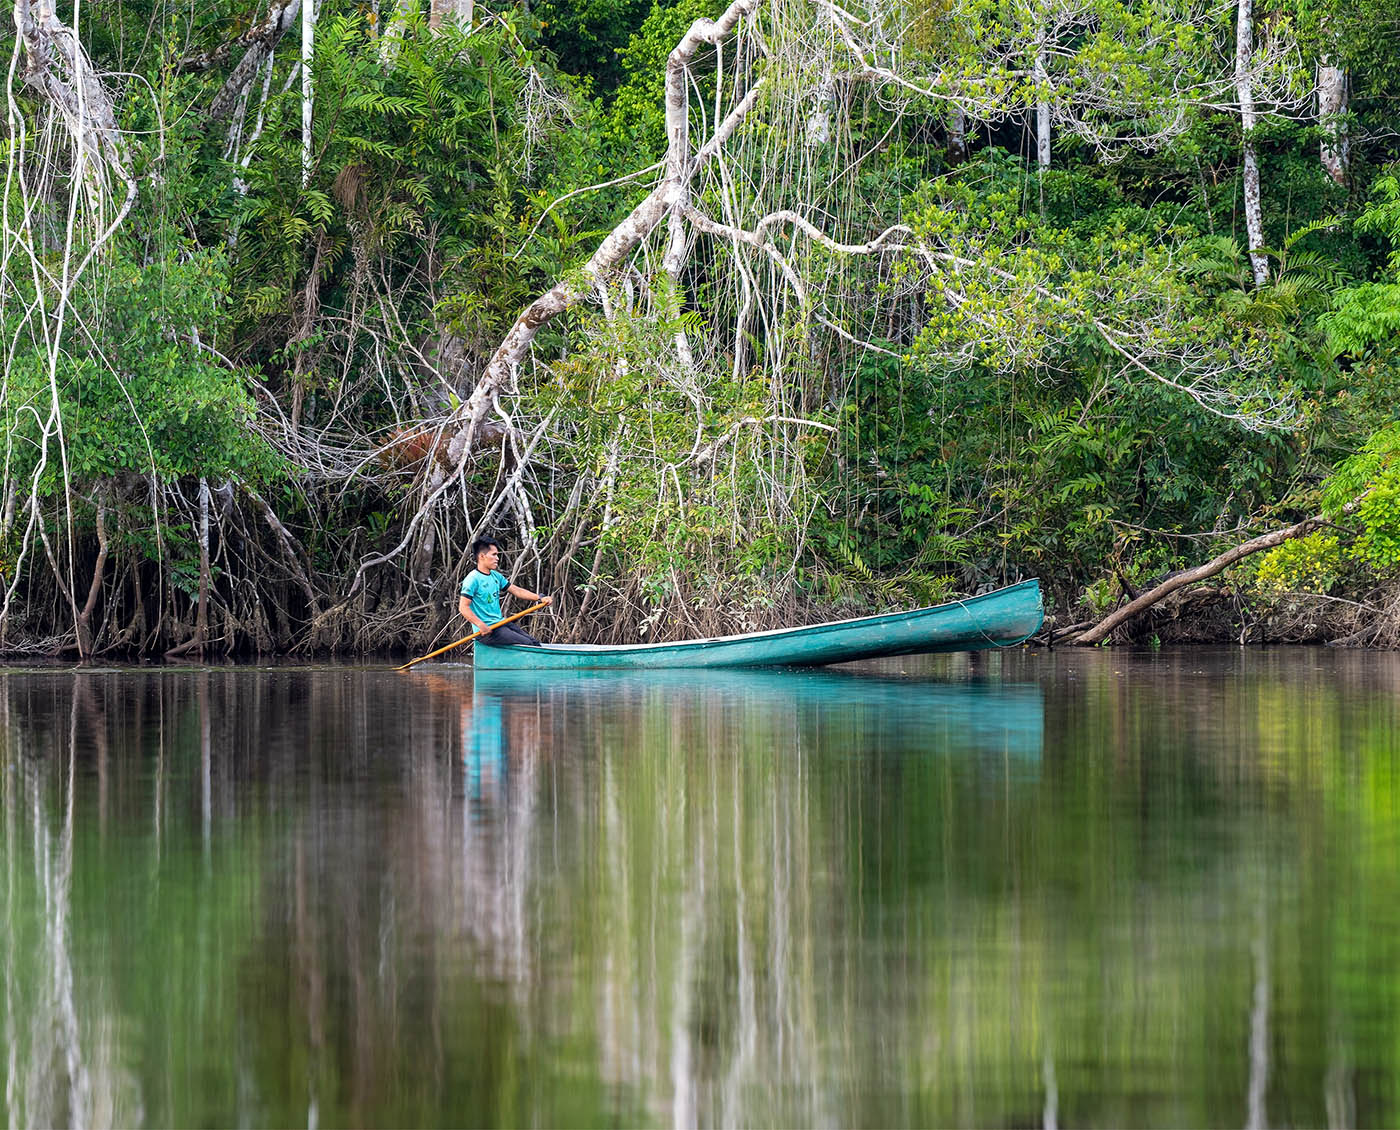 A man in a teal shirt paddles a teal-colored canoe alone. Behind him are green trees which are reflected in the still water.